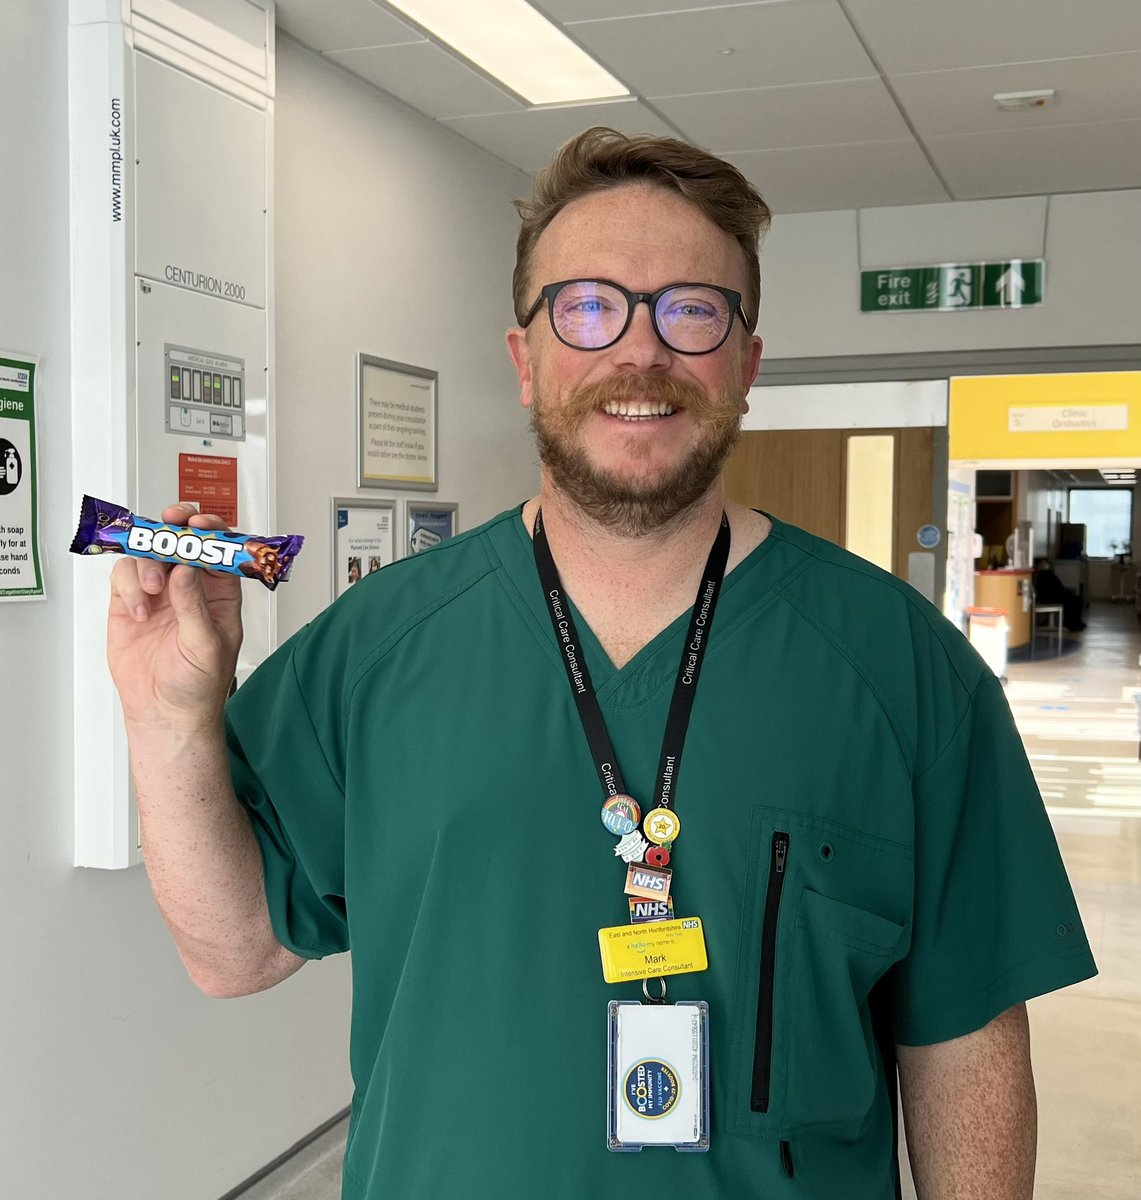 Already lots of people off sick with CoViD. This winter, we need to continue services for our patients. We can do this by protecting ourselves against Covid and flu – and keeping the Trust going. Having both Flu and CoViD vaccines together is safe and effective #GetBoosted2022